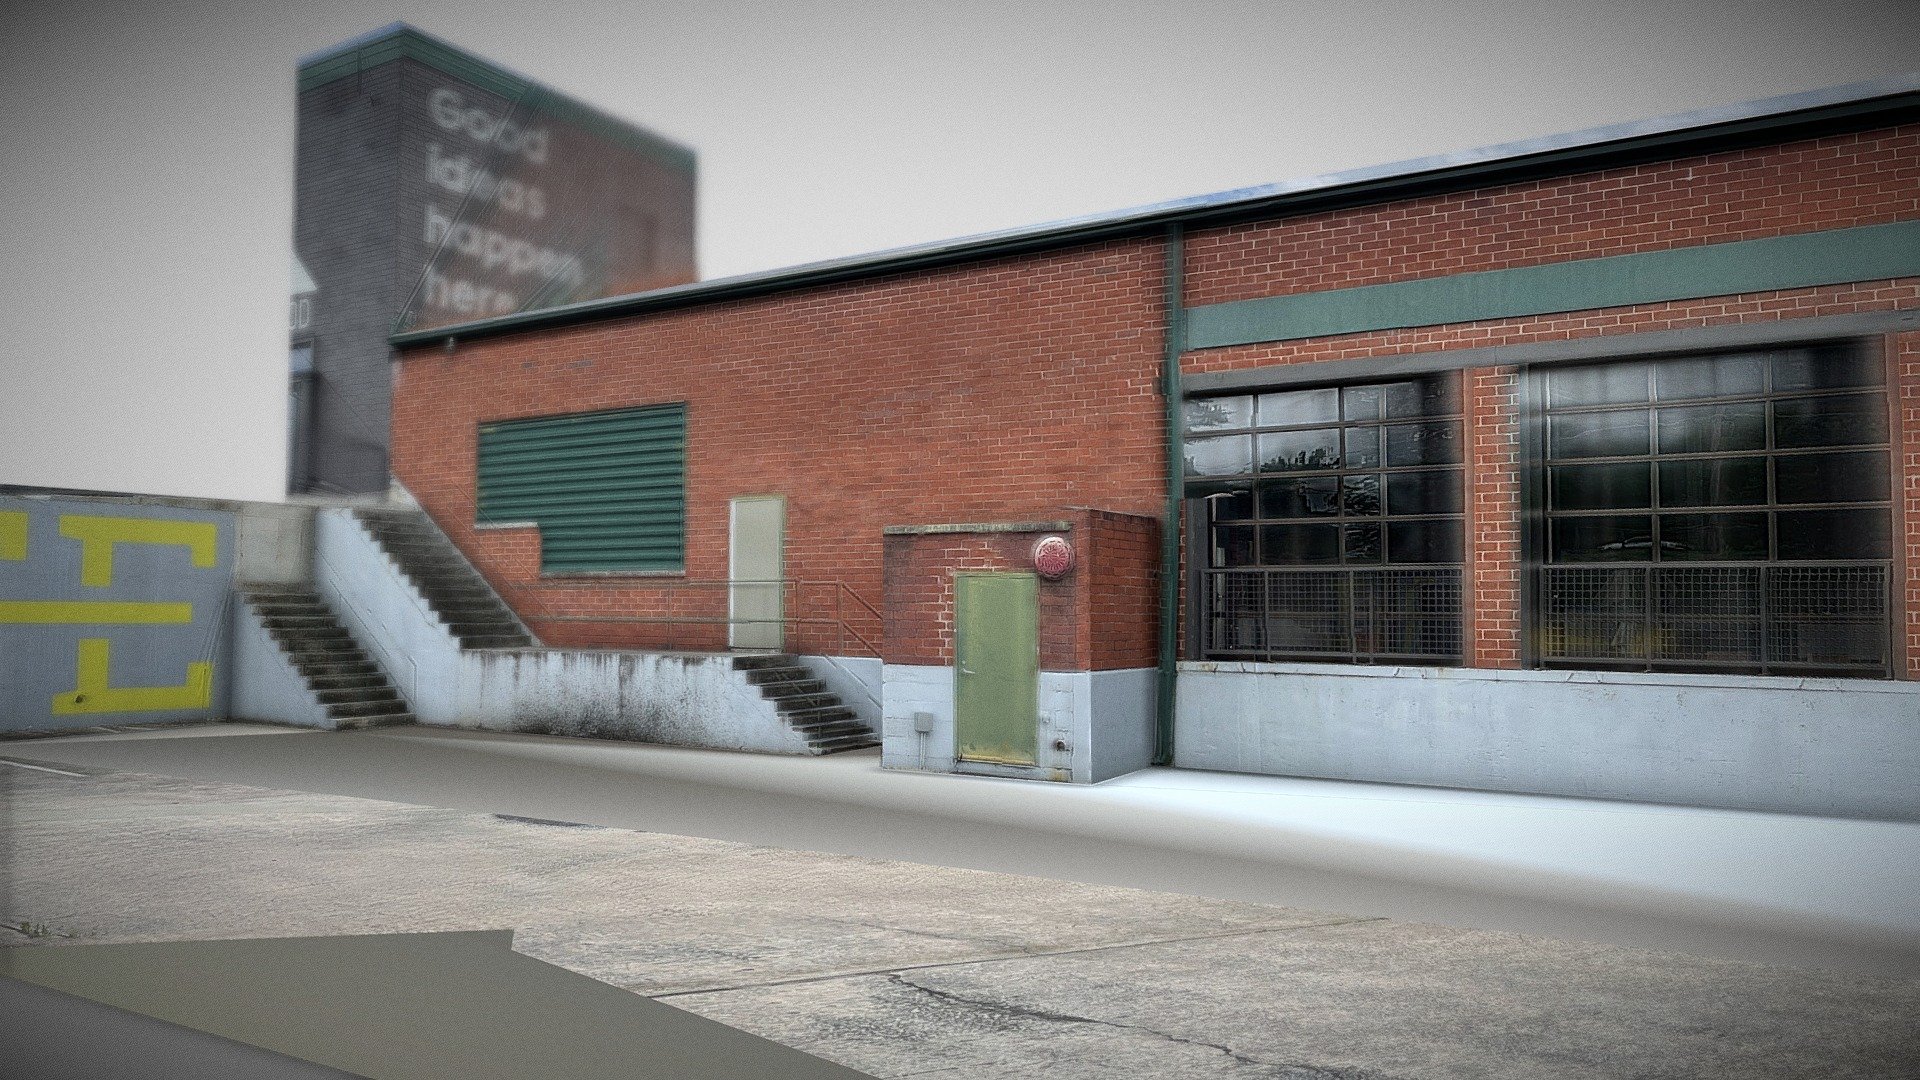 Model was created from photos in Metashape. Then Remodeled in SketchUp and textures were reprojected back onto model.

Raw Model before SketchUp Reconstruction
https://skfb.ly/ooqUT - Warehouse Front - Buy Royalty Free 3D model by Marc Sawyer (@whitewashstudio) 3d model